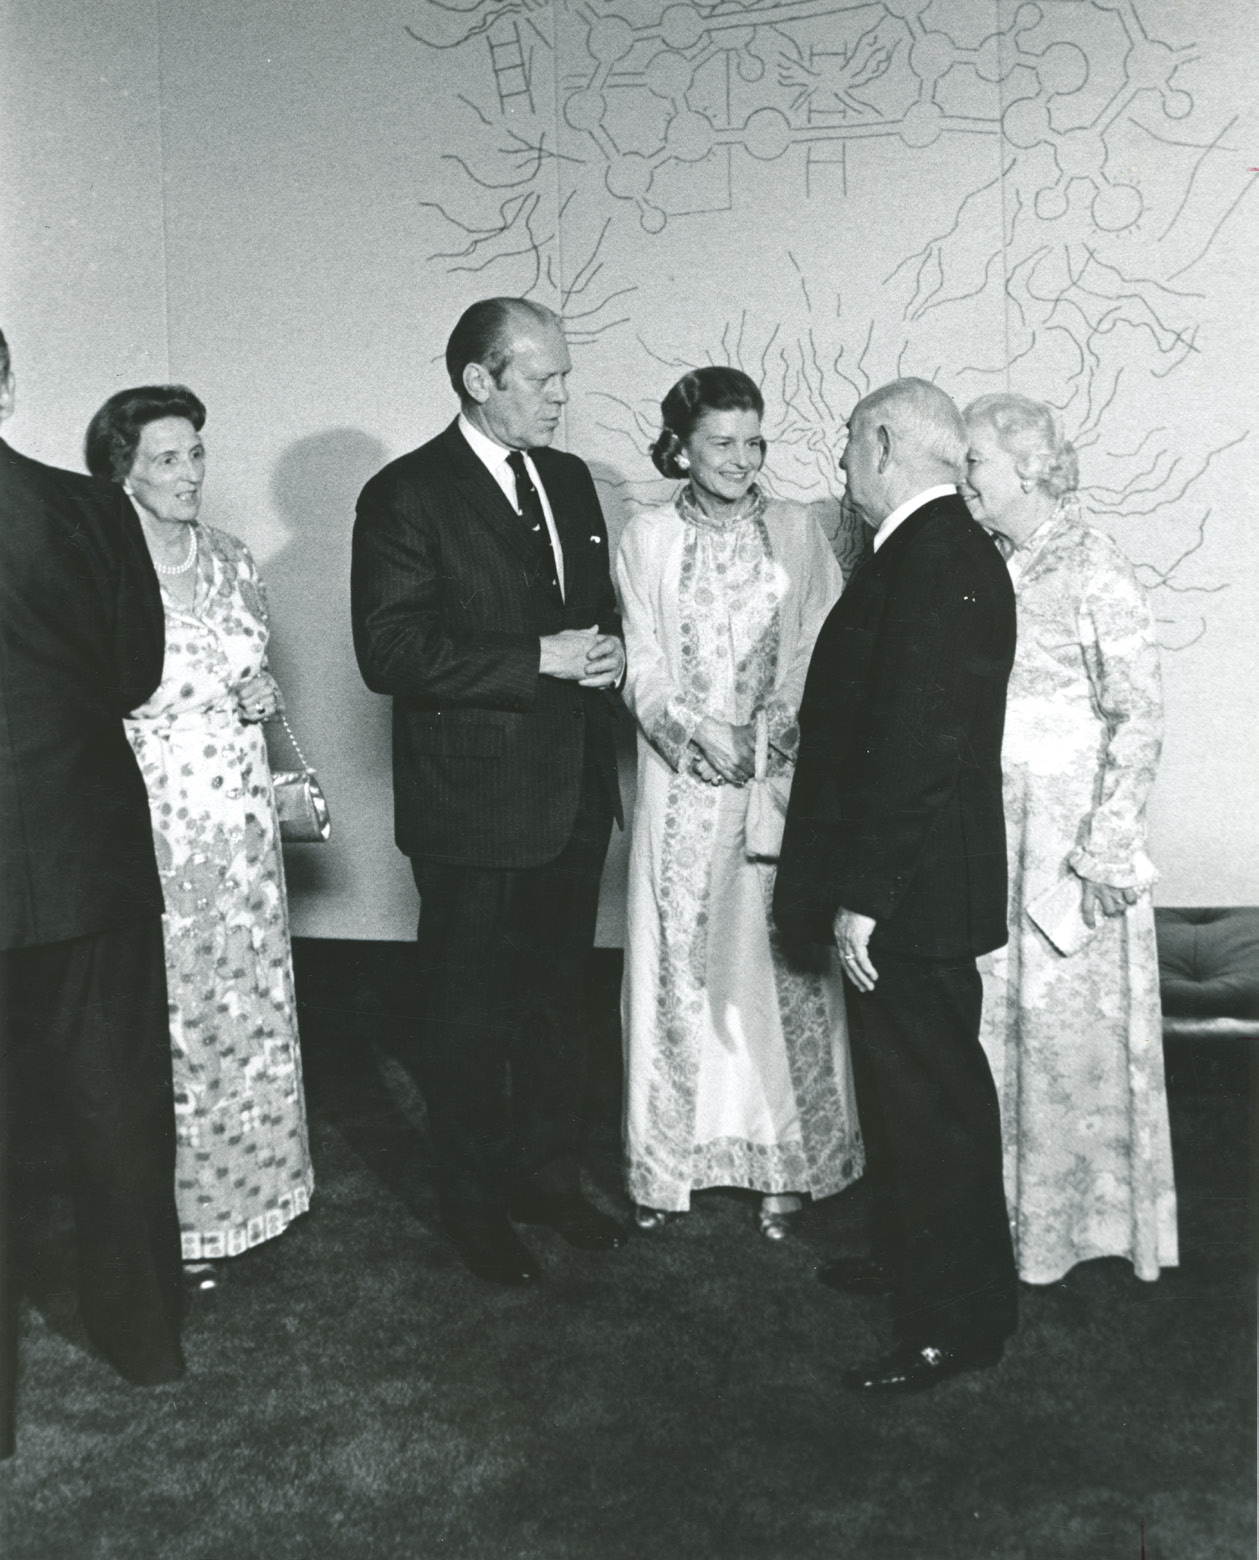 President Gerald Ford and First Lady Betty Ford talk with President Spencer W. Kimball and Sister Camilla Kimball at the Tabernacle Choir concert held in the John F. Kennedy Center for the Performing Arts in conjunction with the dedication of the Washington D.C. Temple and open house. Kimball–Ford Photos, Church History Library.